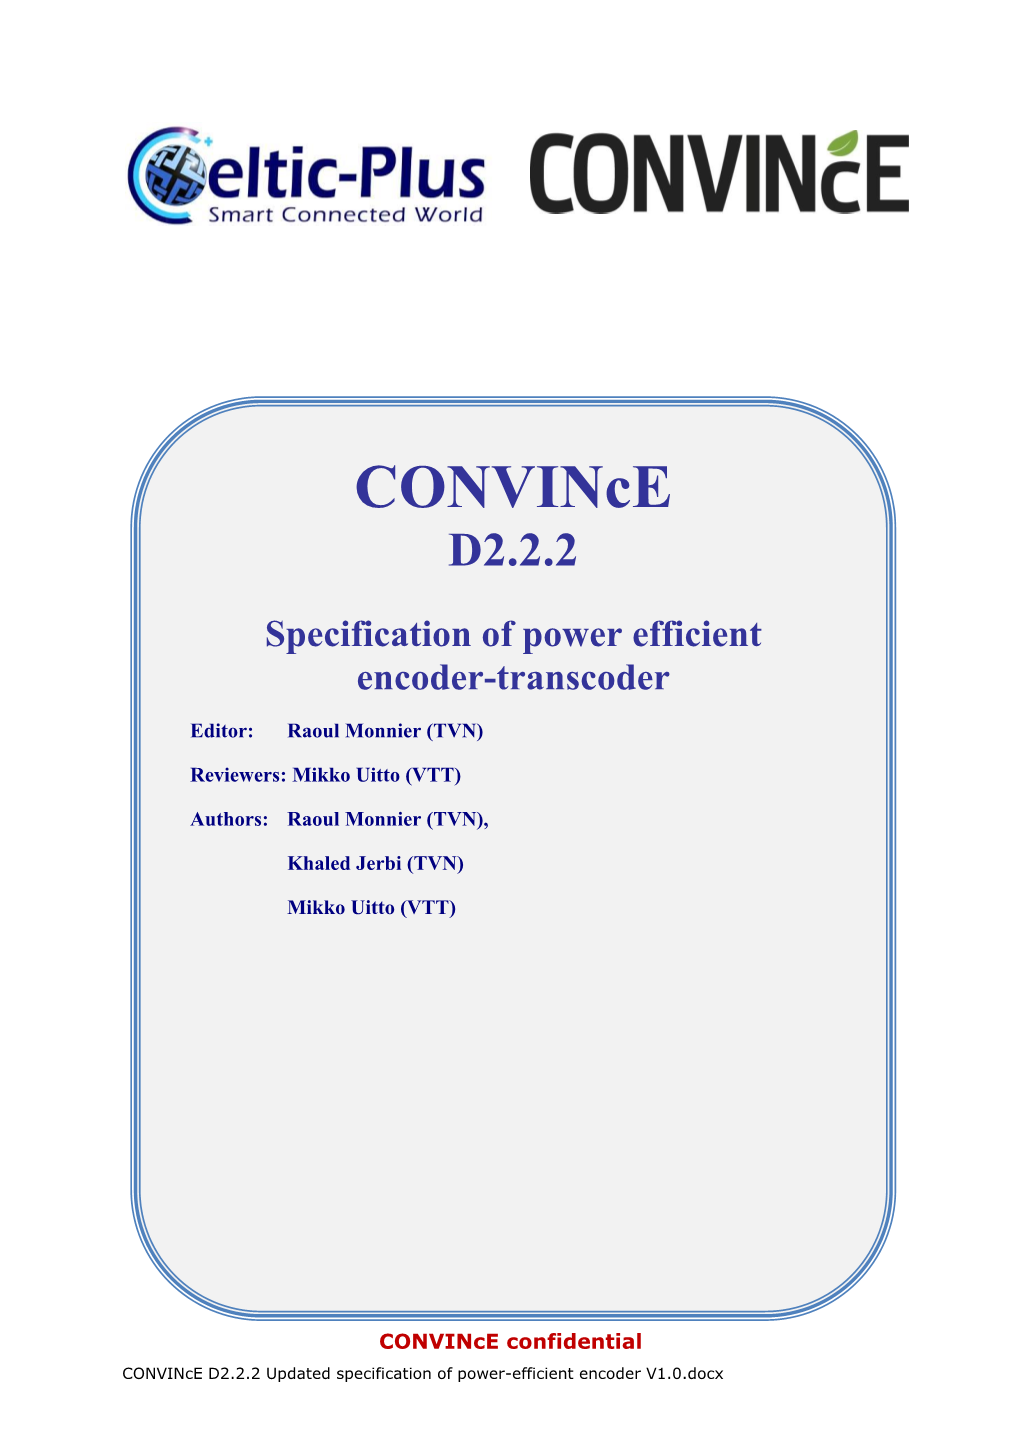 D2.2.2 Updated Specification of Power-Efficient Encoder V1.0.Docx Page 1/34 EXECUTIVE SUMMARY